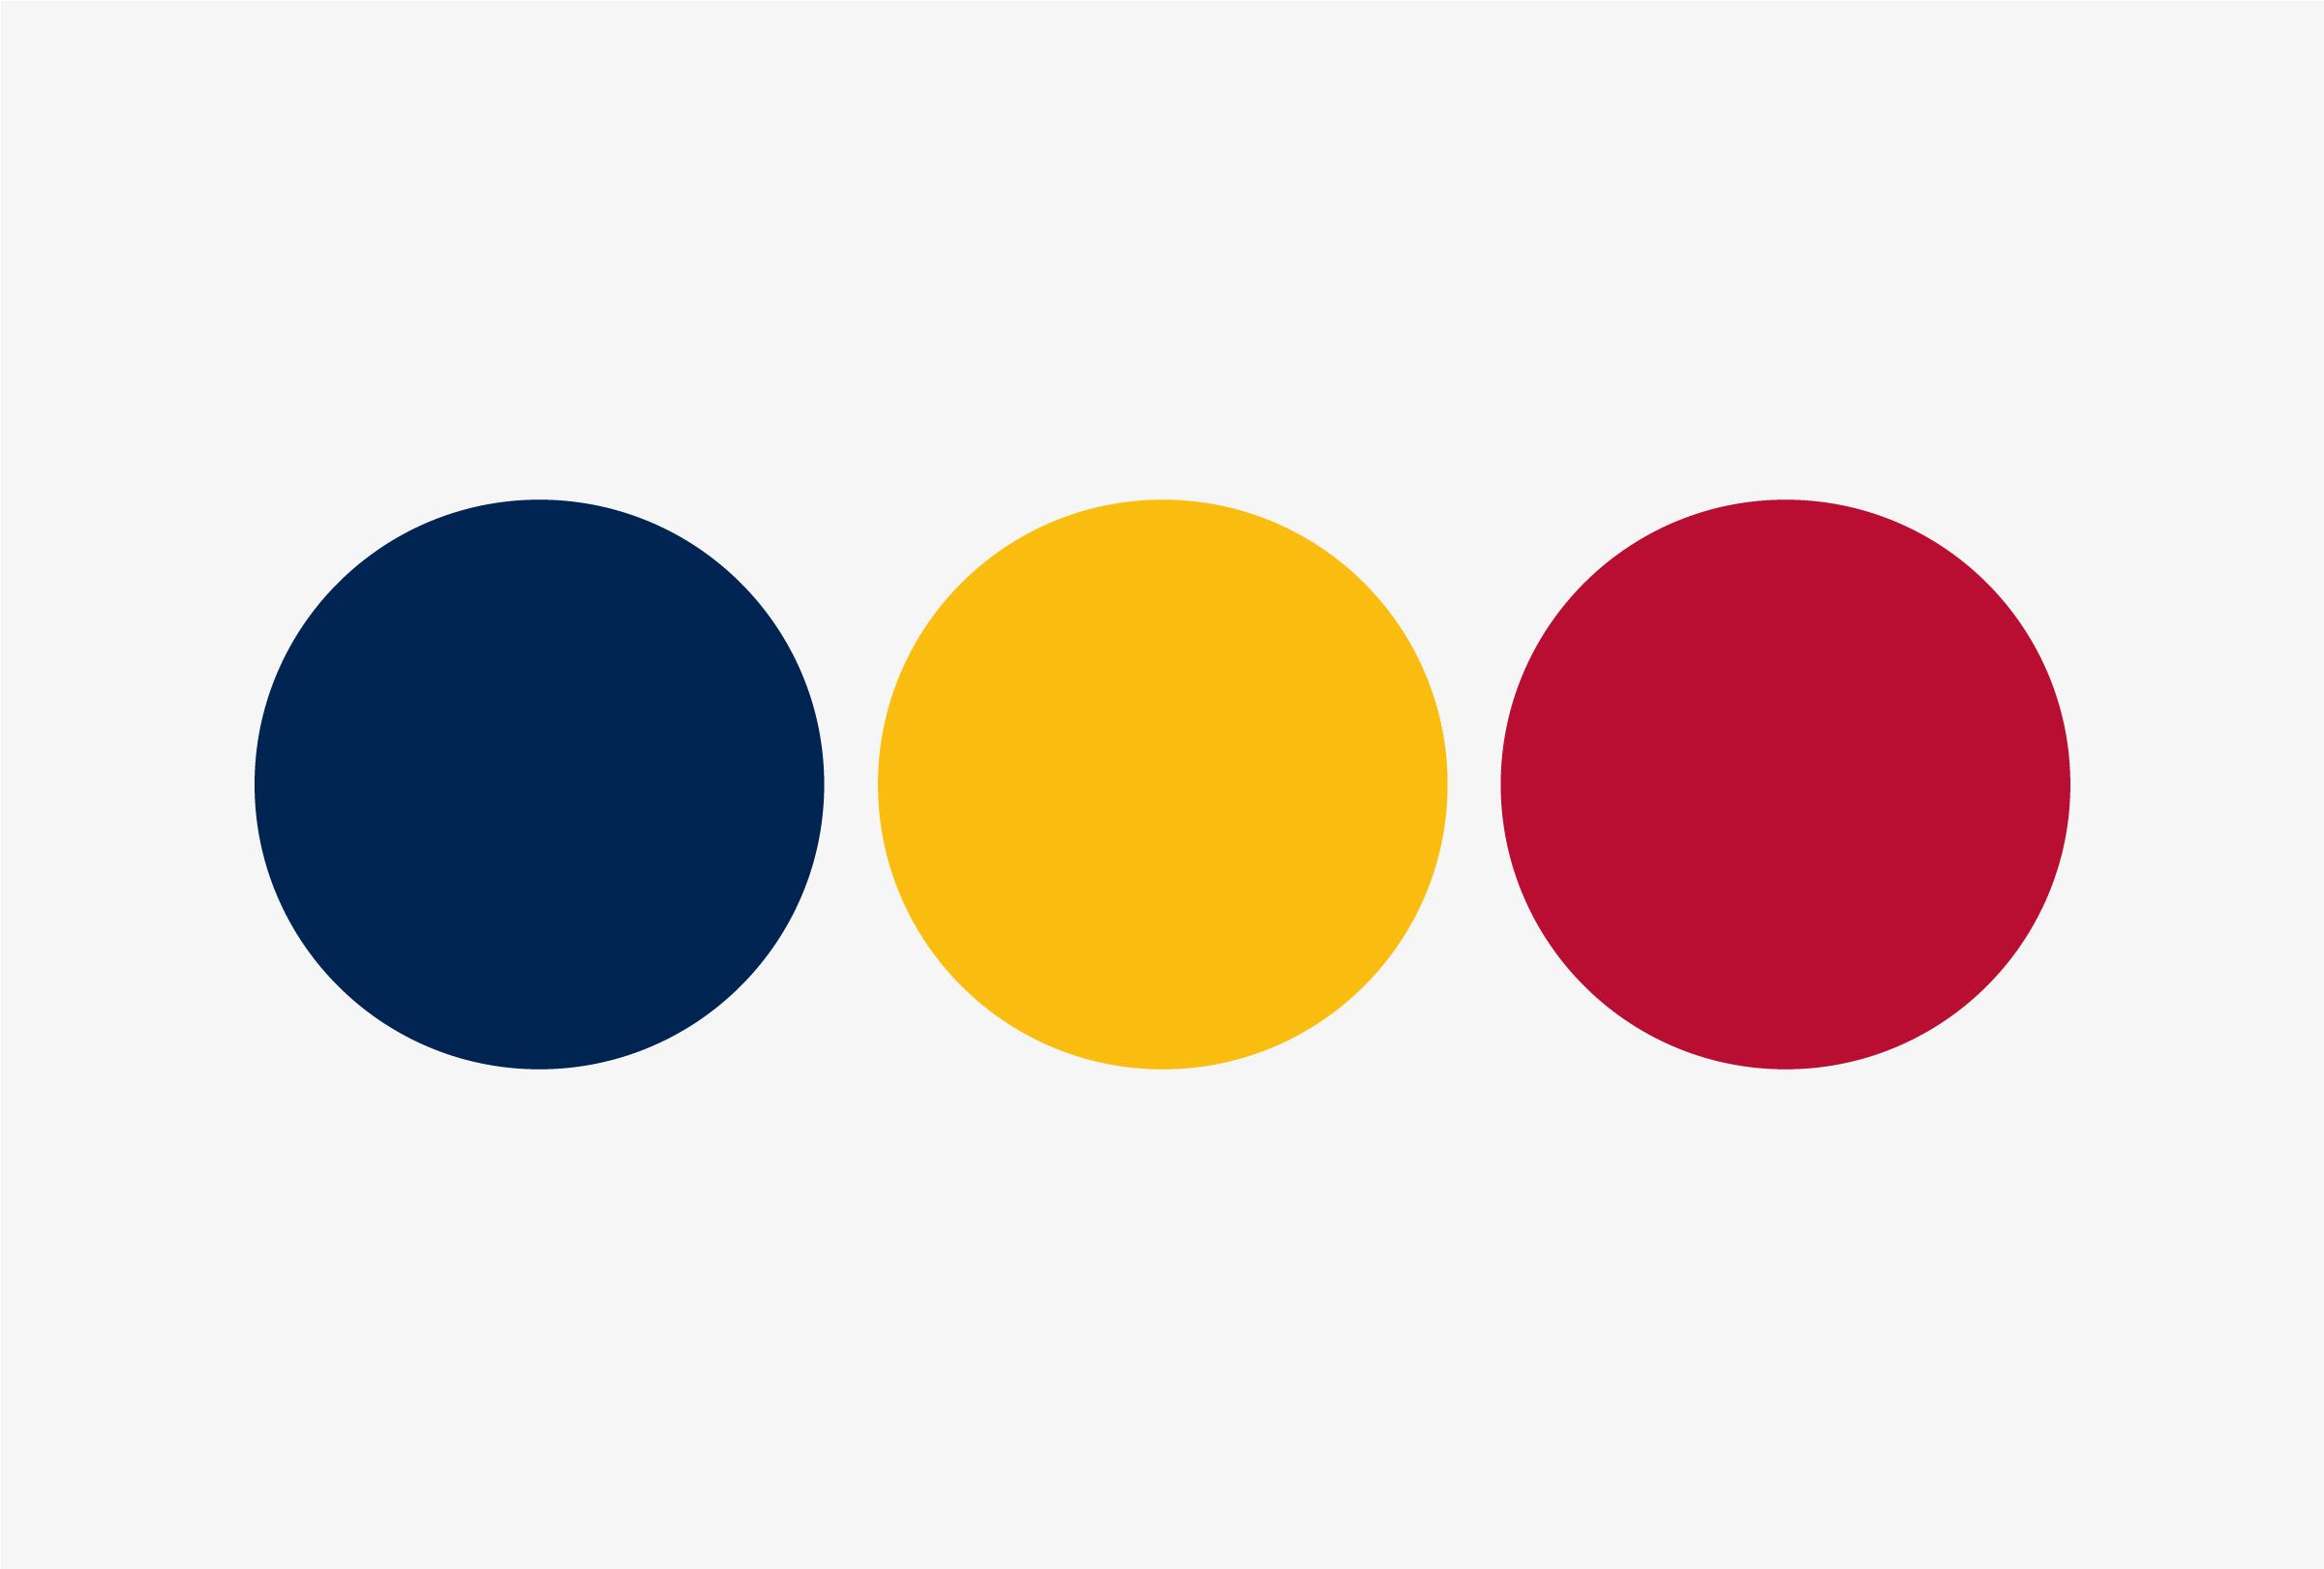 Circular swatches of the Queen's primary colours: blue, gold, and red